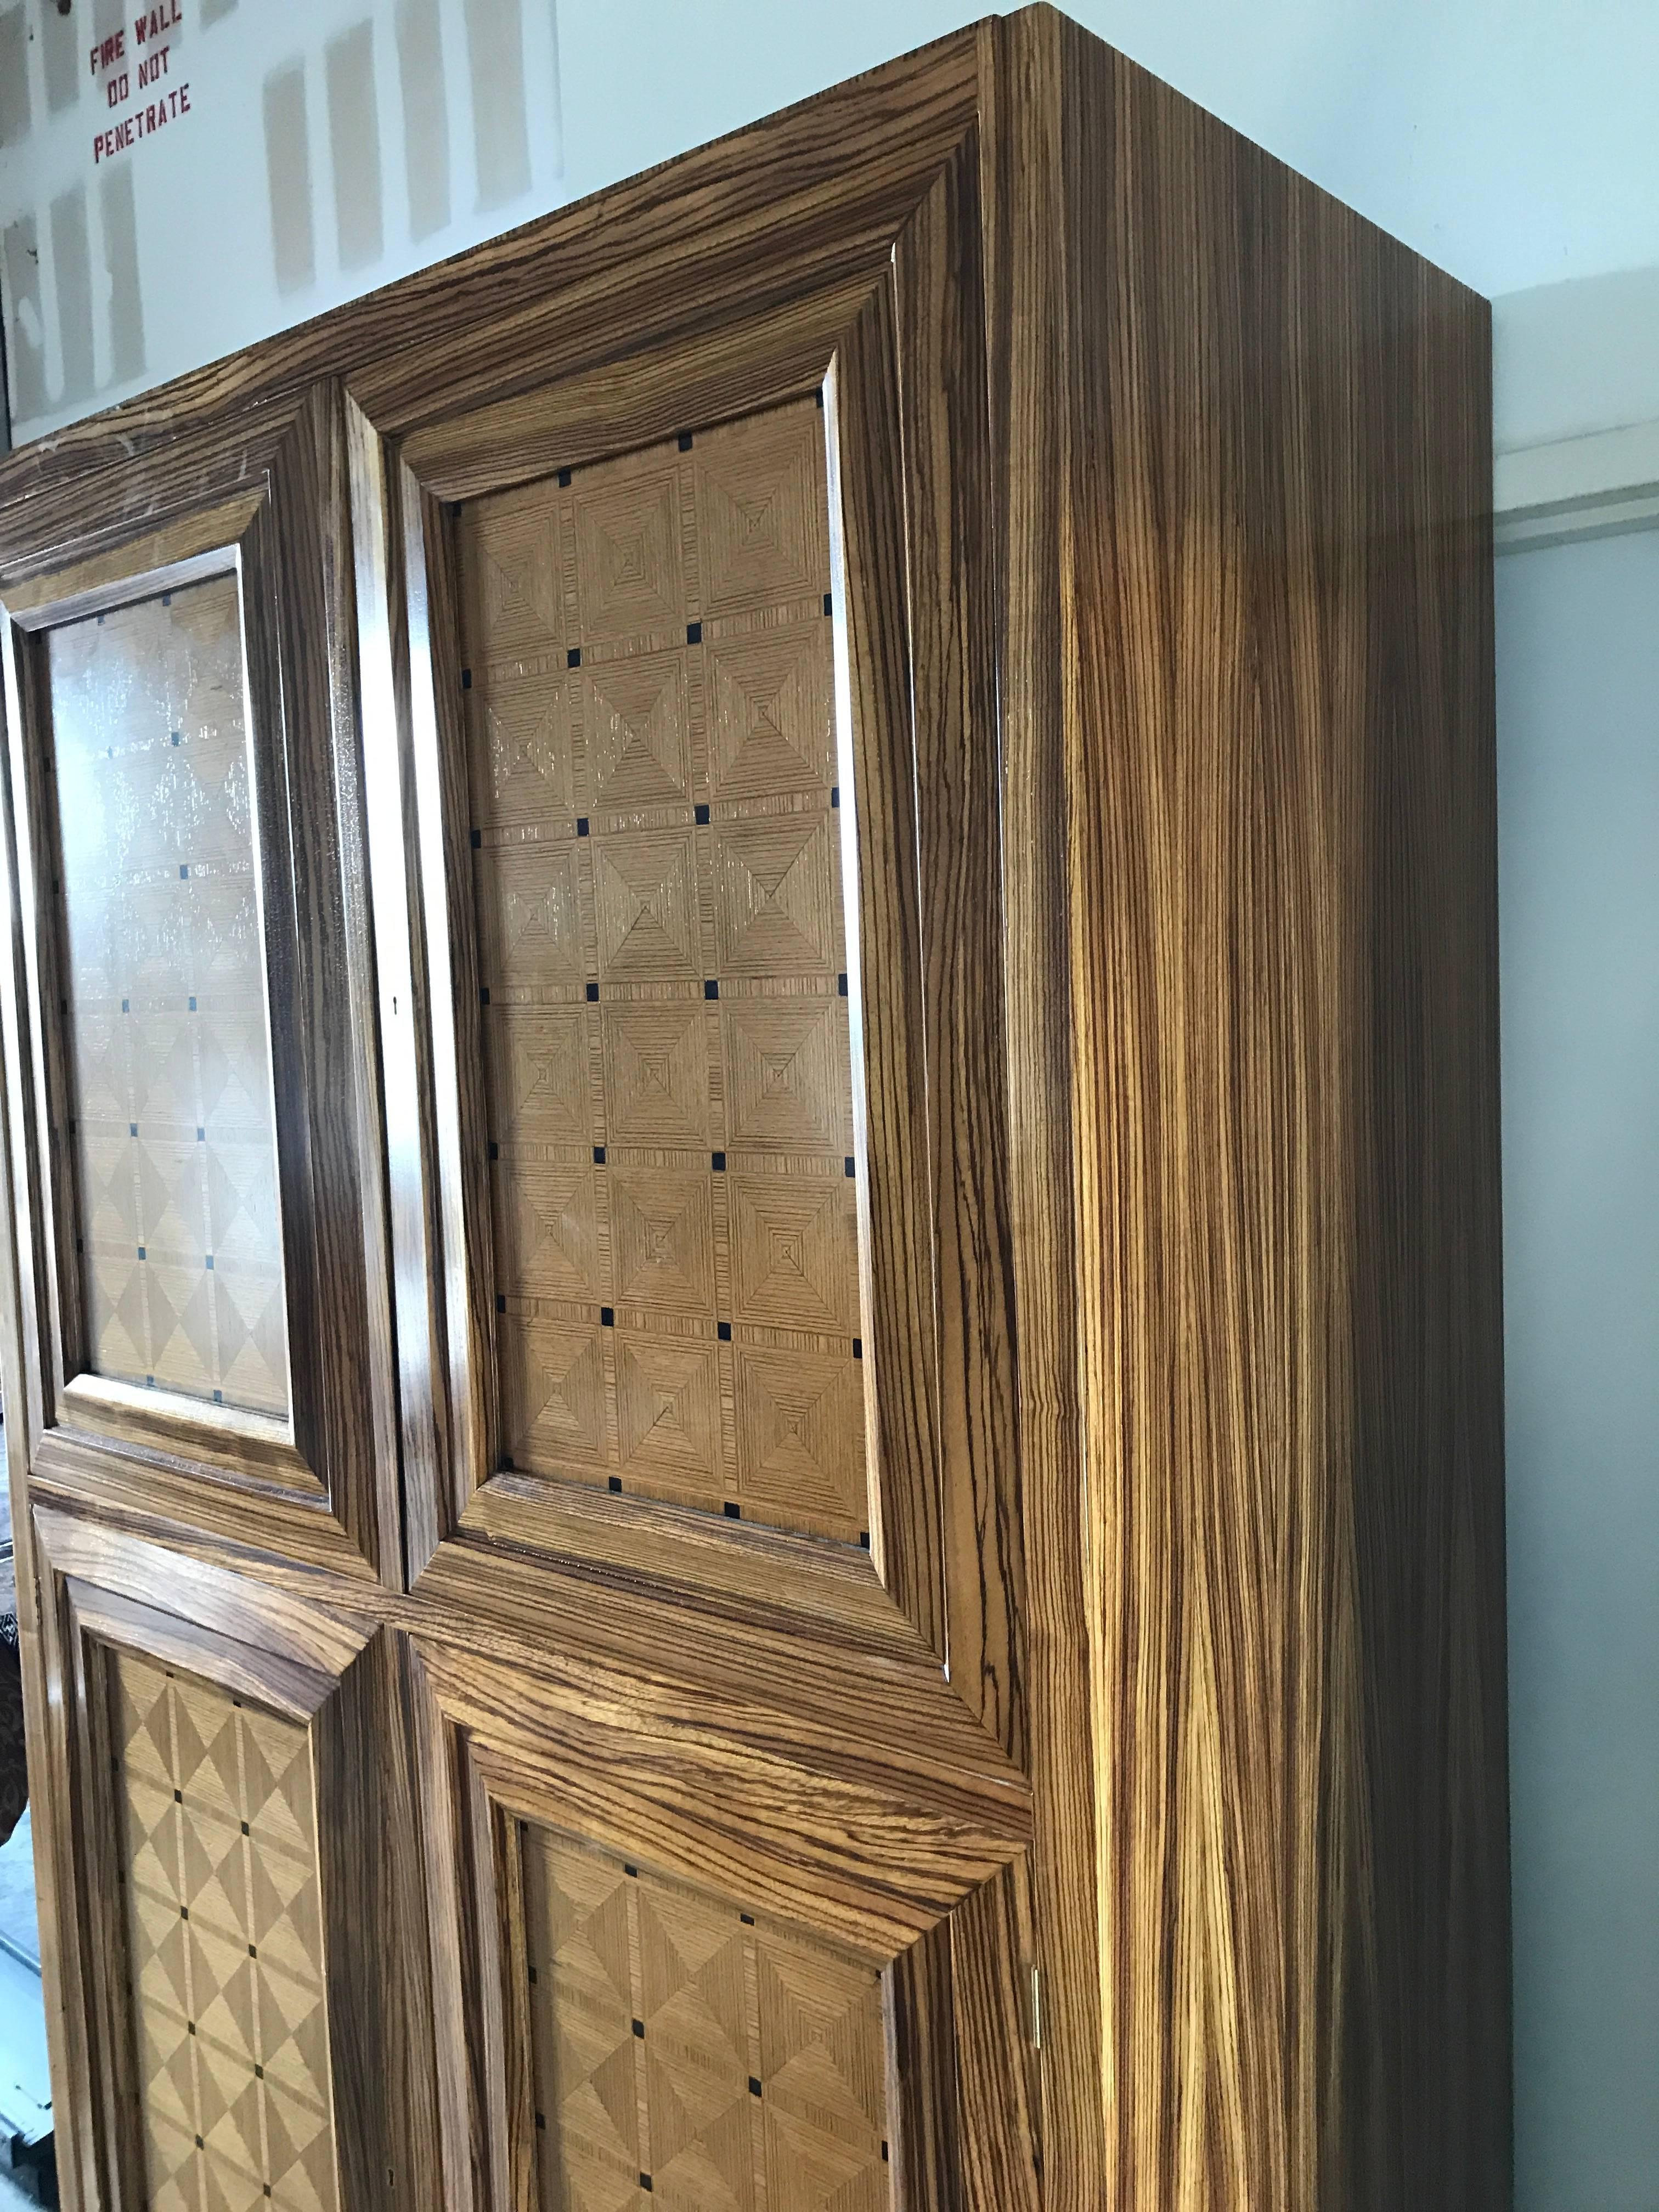 Lucien Rollin Massive Art Deco Style Marquetry Armoire by William Switzer

Give your living space a touch of elegance with this stunning Lucien Rollin massive art deco style marquetry armoire by William Switzer. This armoire is the perfect blend of